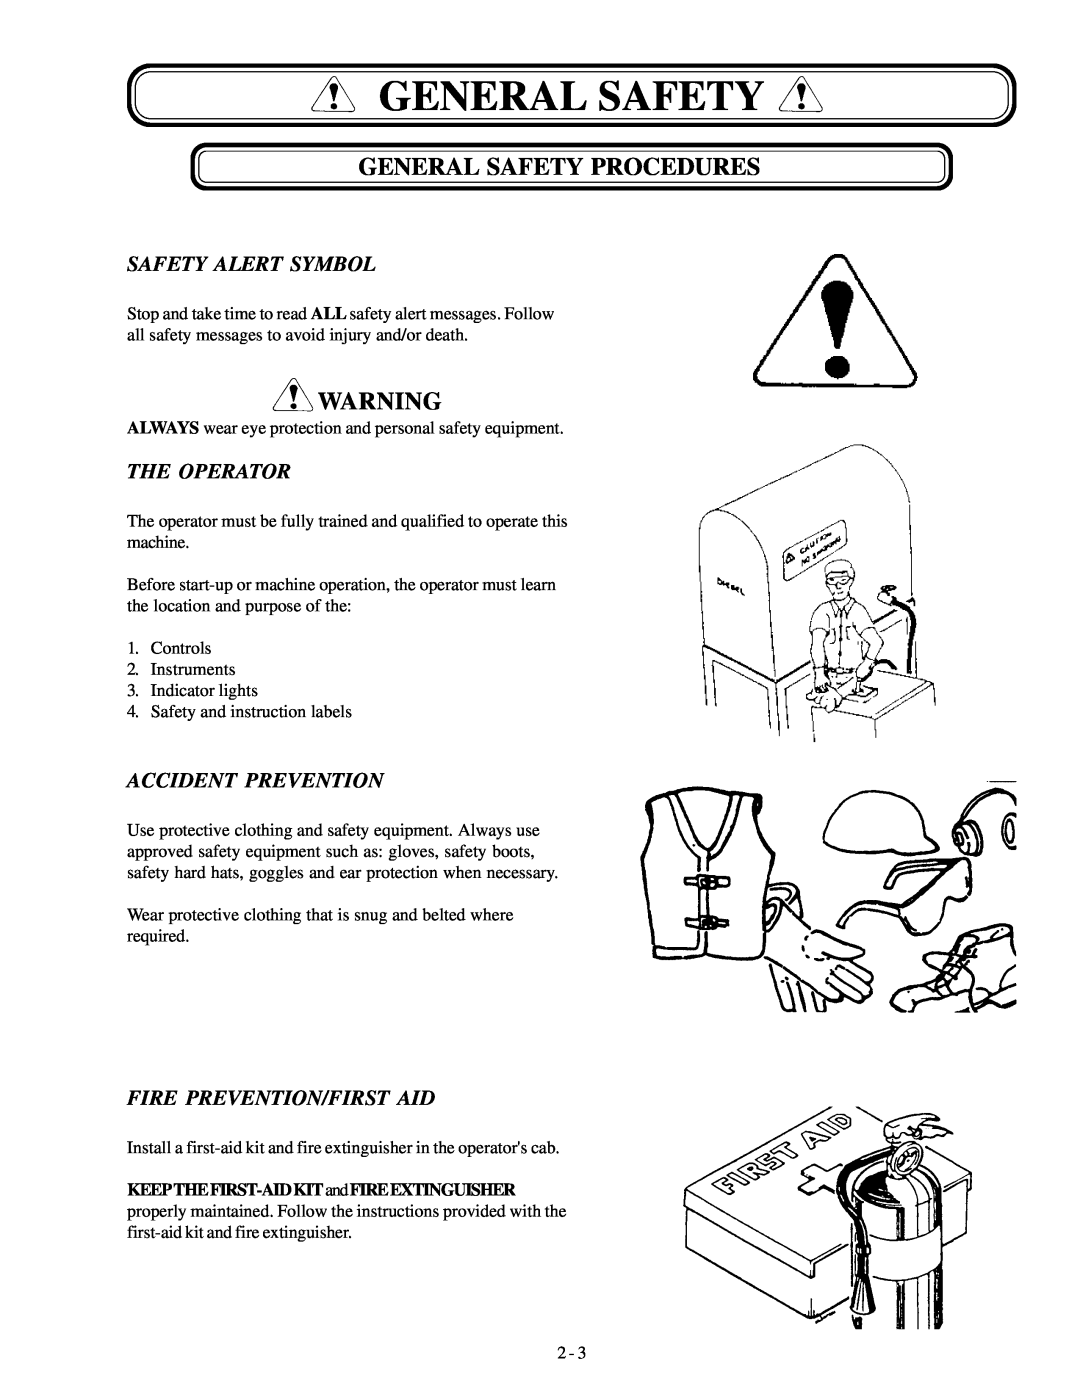 Genie GTH-1048, GTH-1056 manual General Safety Procedures, Safety Alert Symbol, The Operator, Accident Prevention 